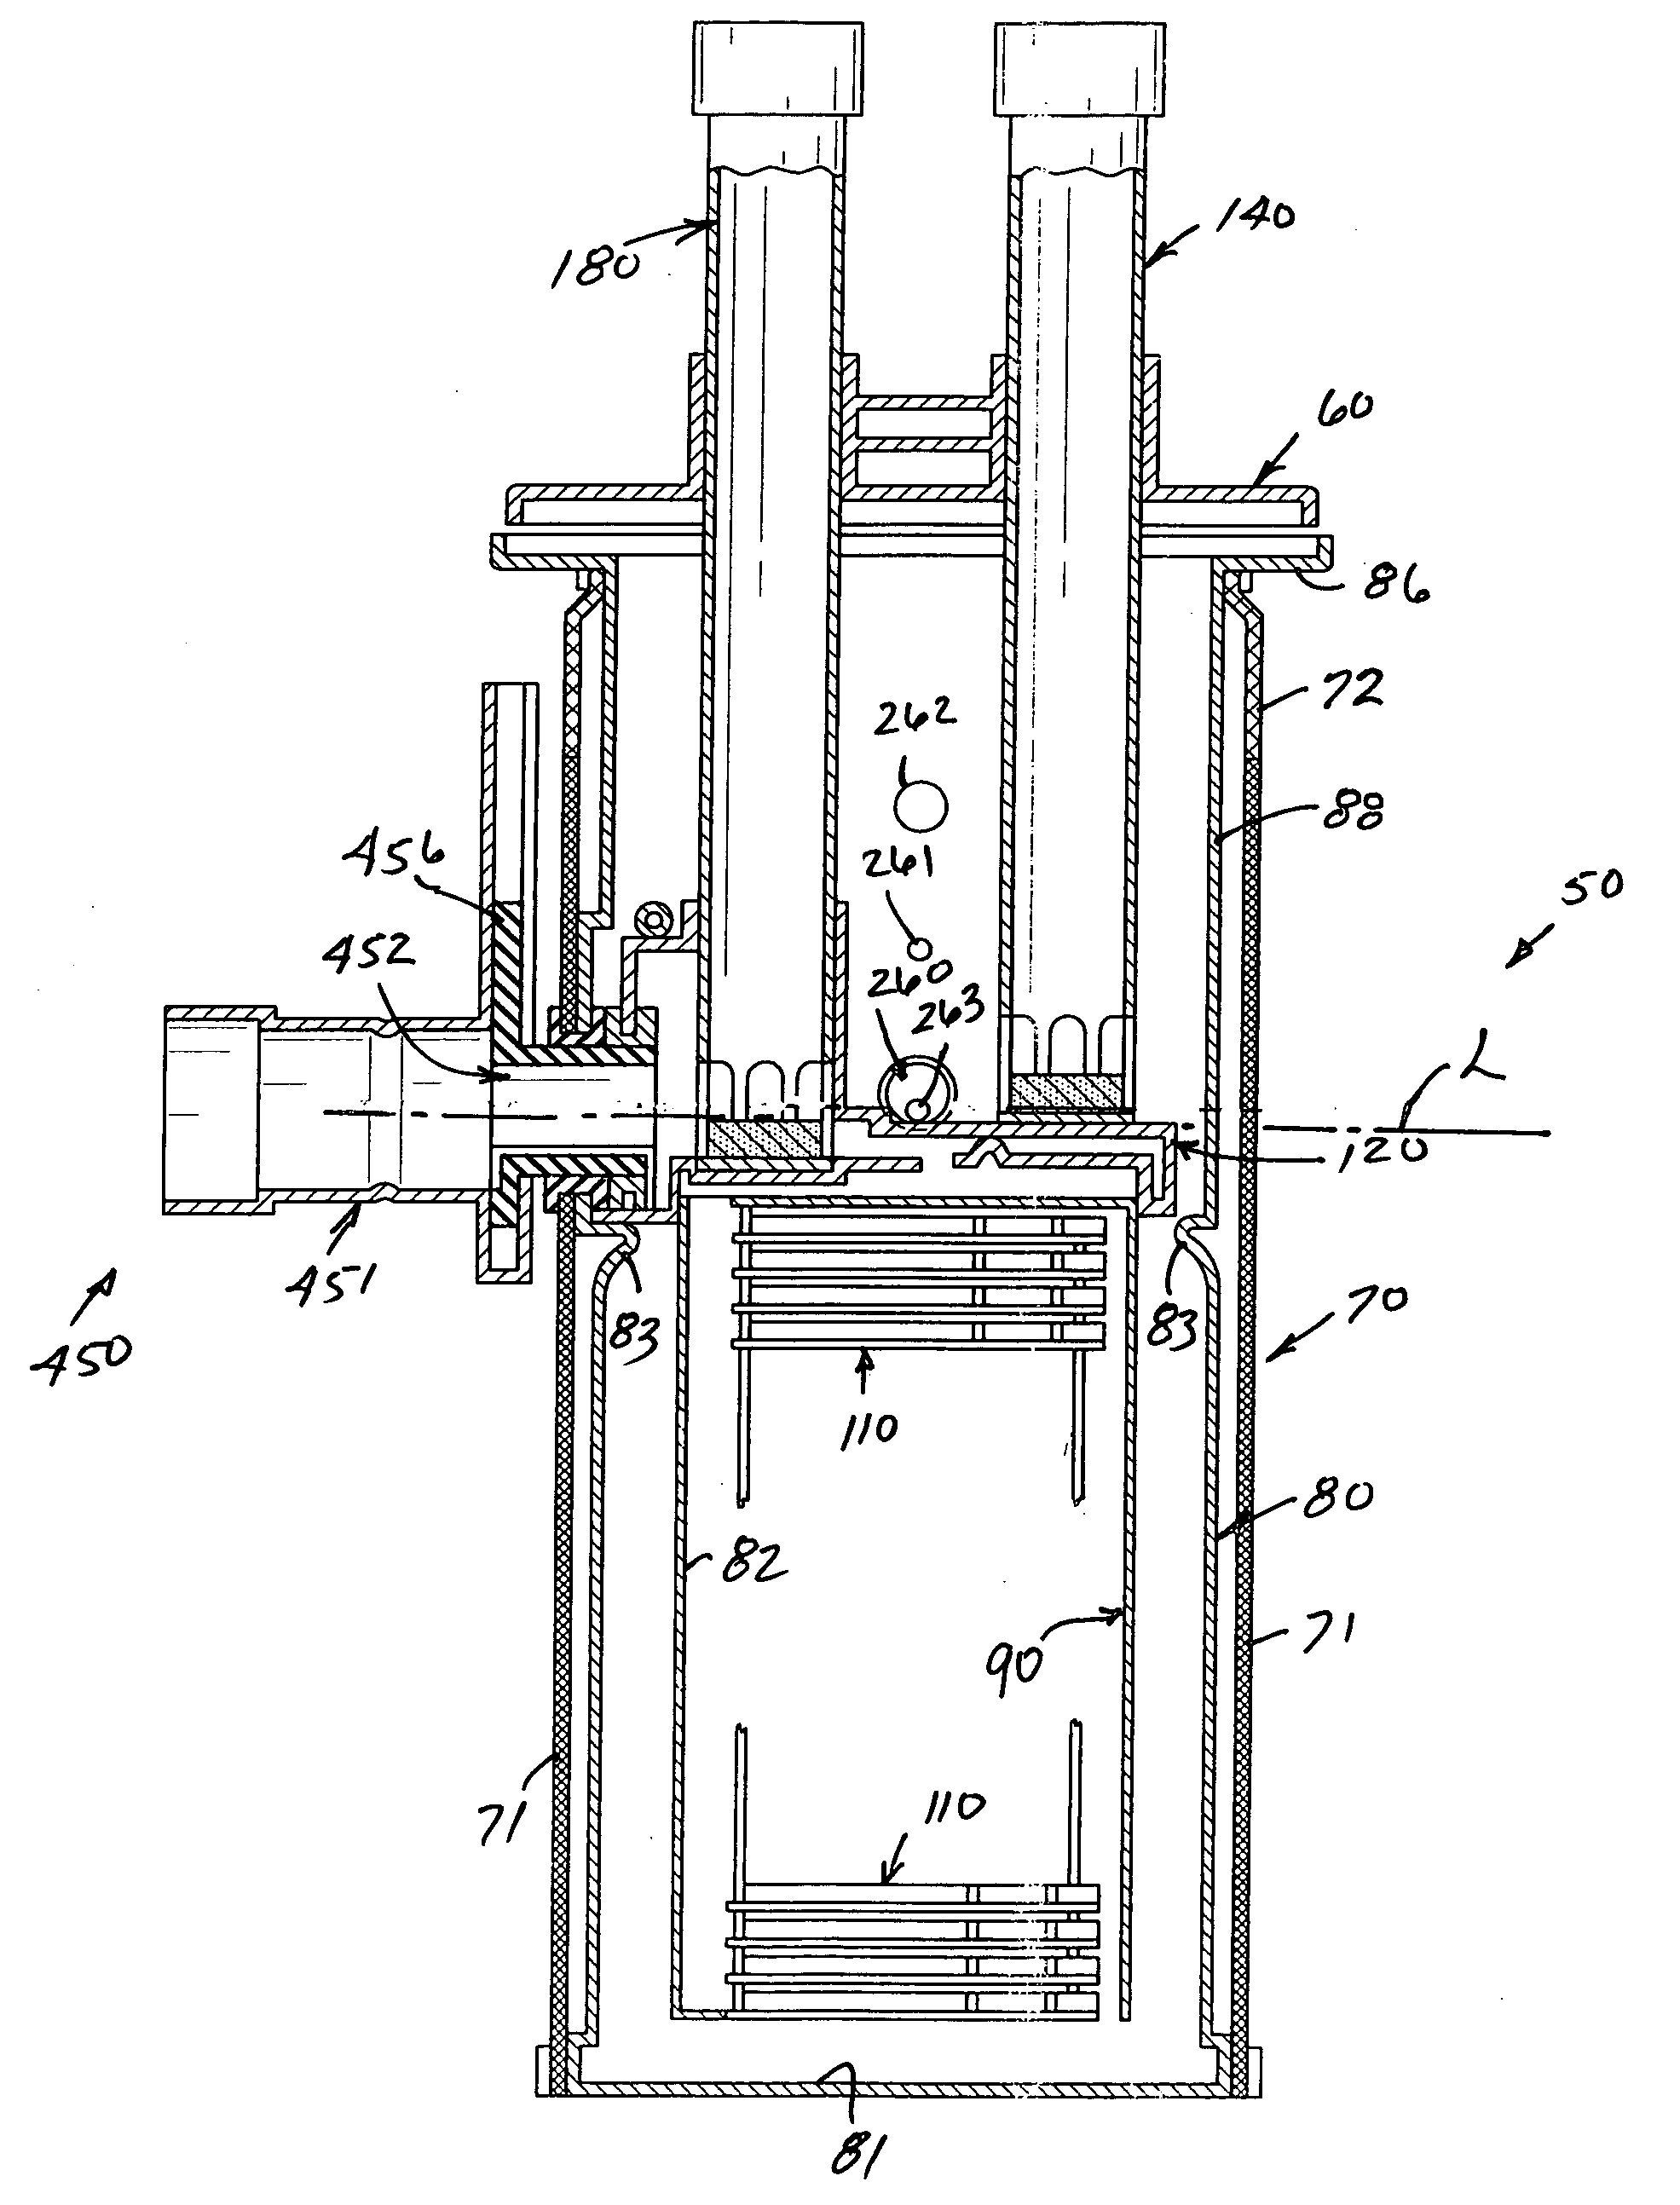 Wastewater flow equalization system and method